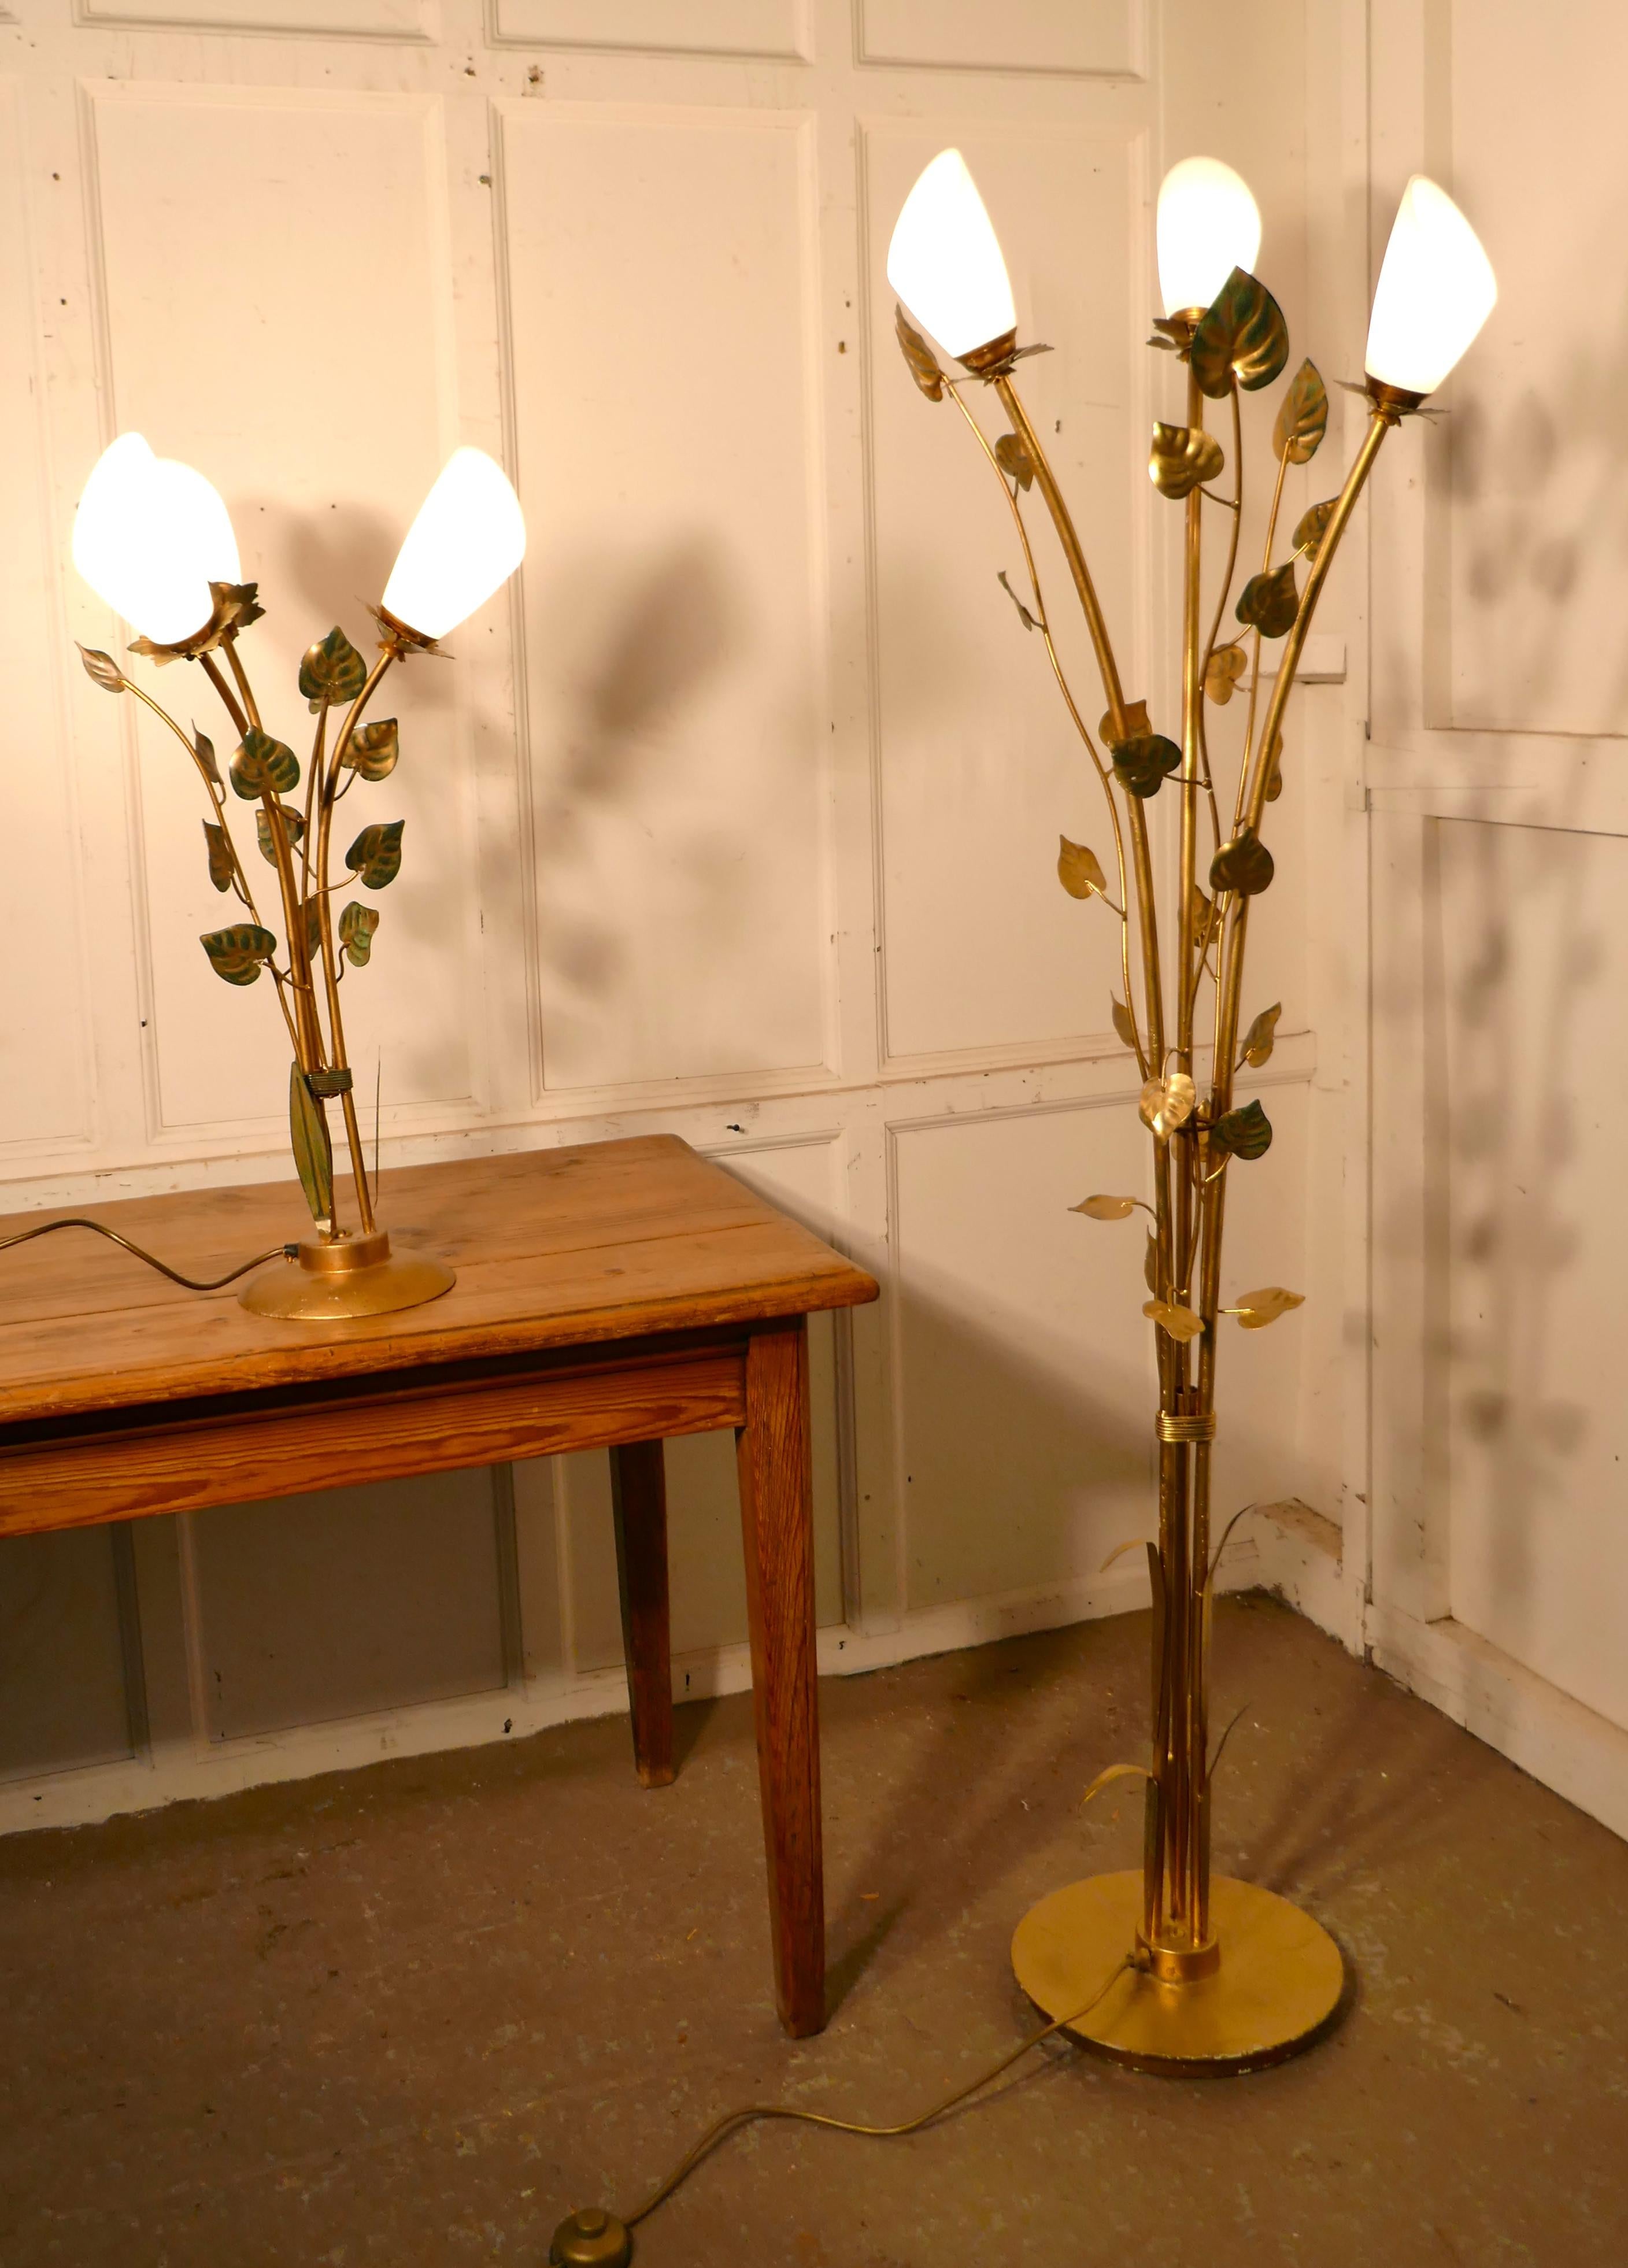 Pair of French toleware lamps with leaves in the orangery style, floor and table lamp.

The lamps have a brassed finish with hints of green, they are designed to look like delicate leafy plants
Each lamp has a round base, with several upward